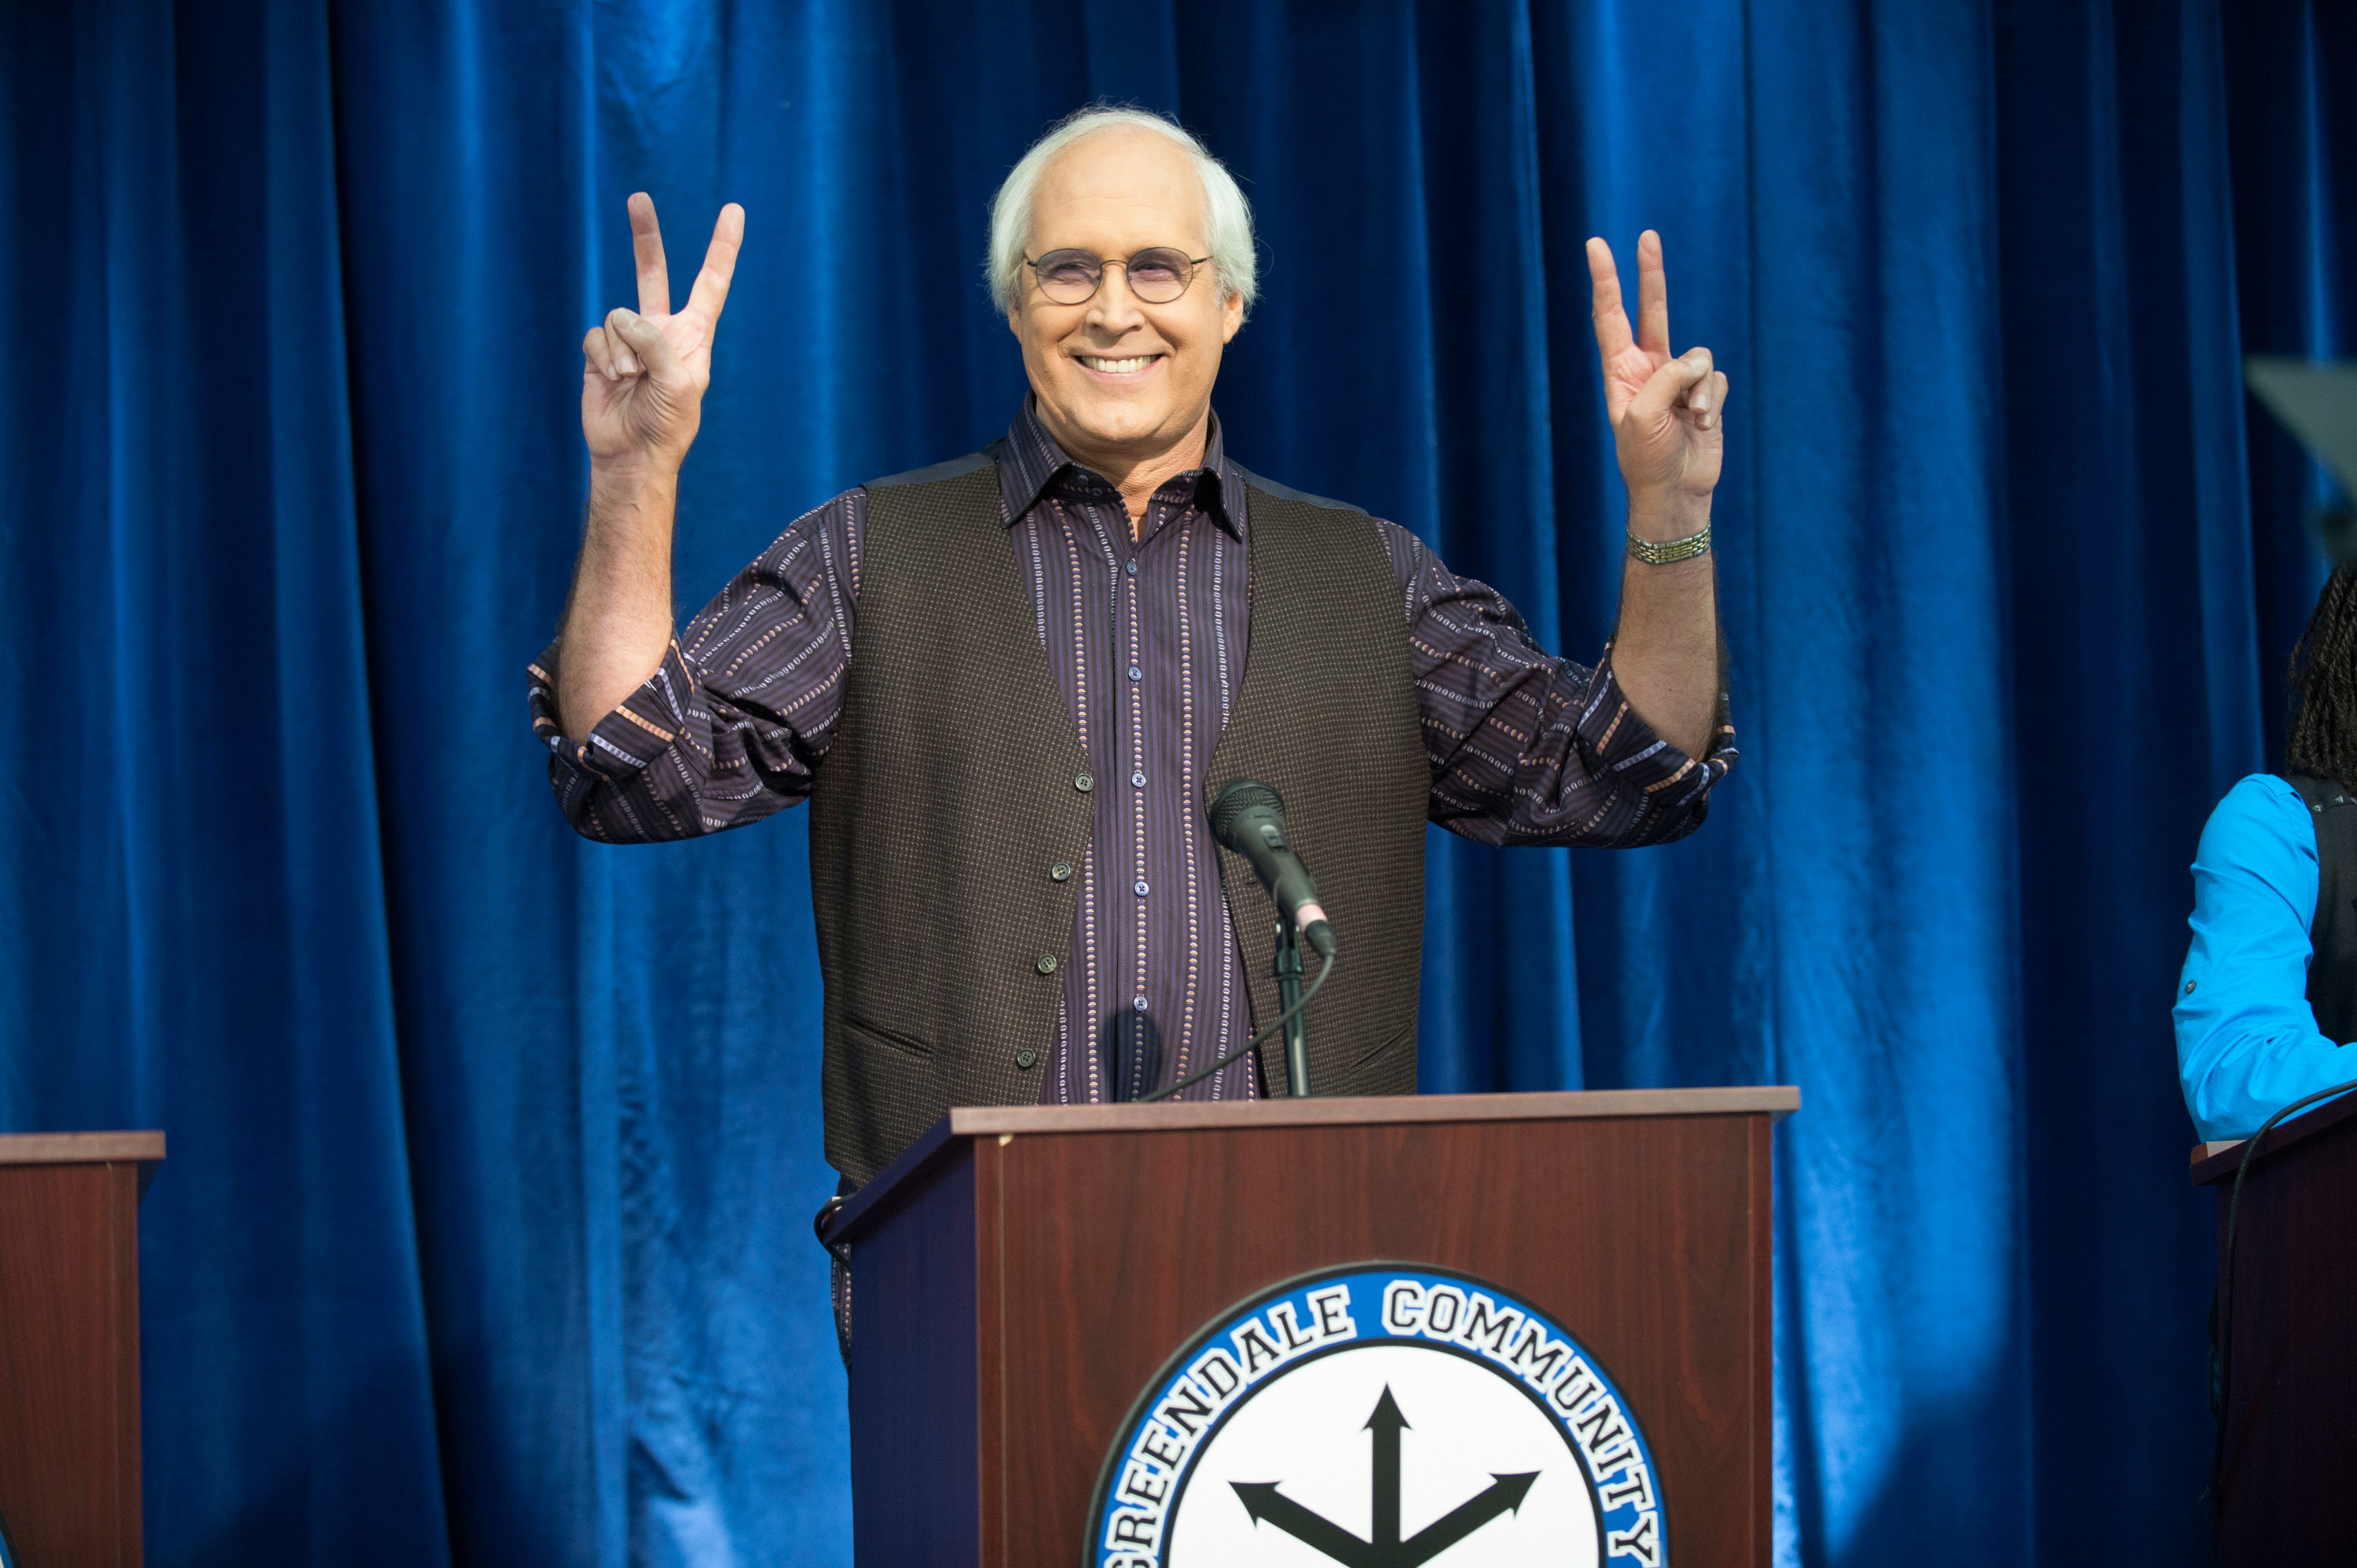 Chevy Chase on stage at a Greendale Community College event, smiling and holding up both hands with peace signs, wearing a button-up shirt and vest